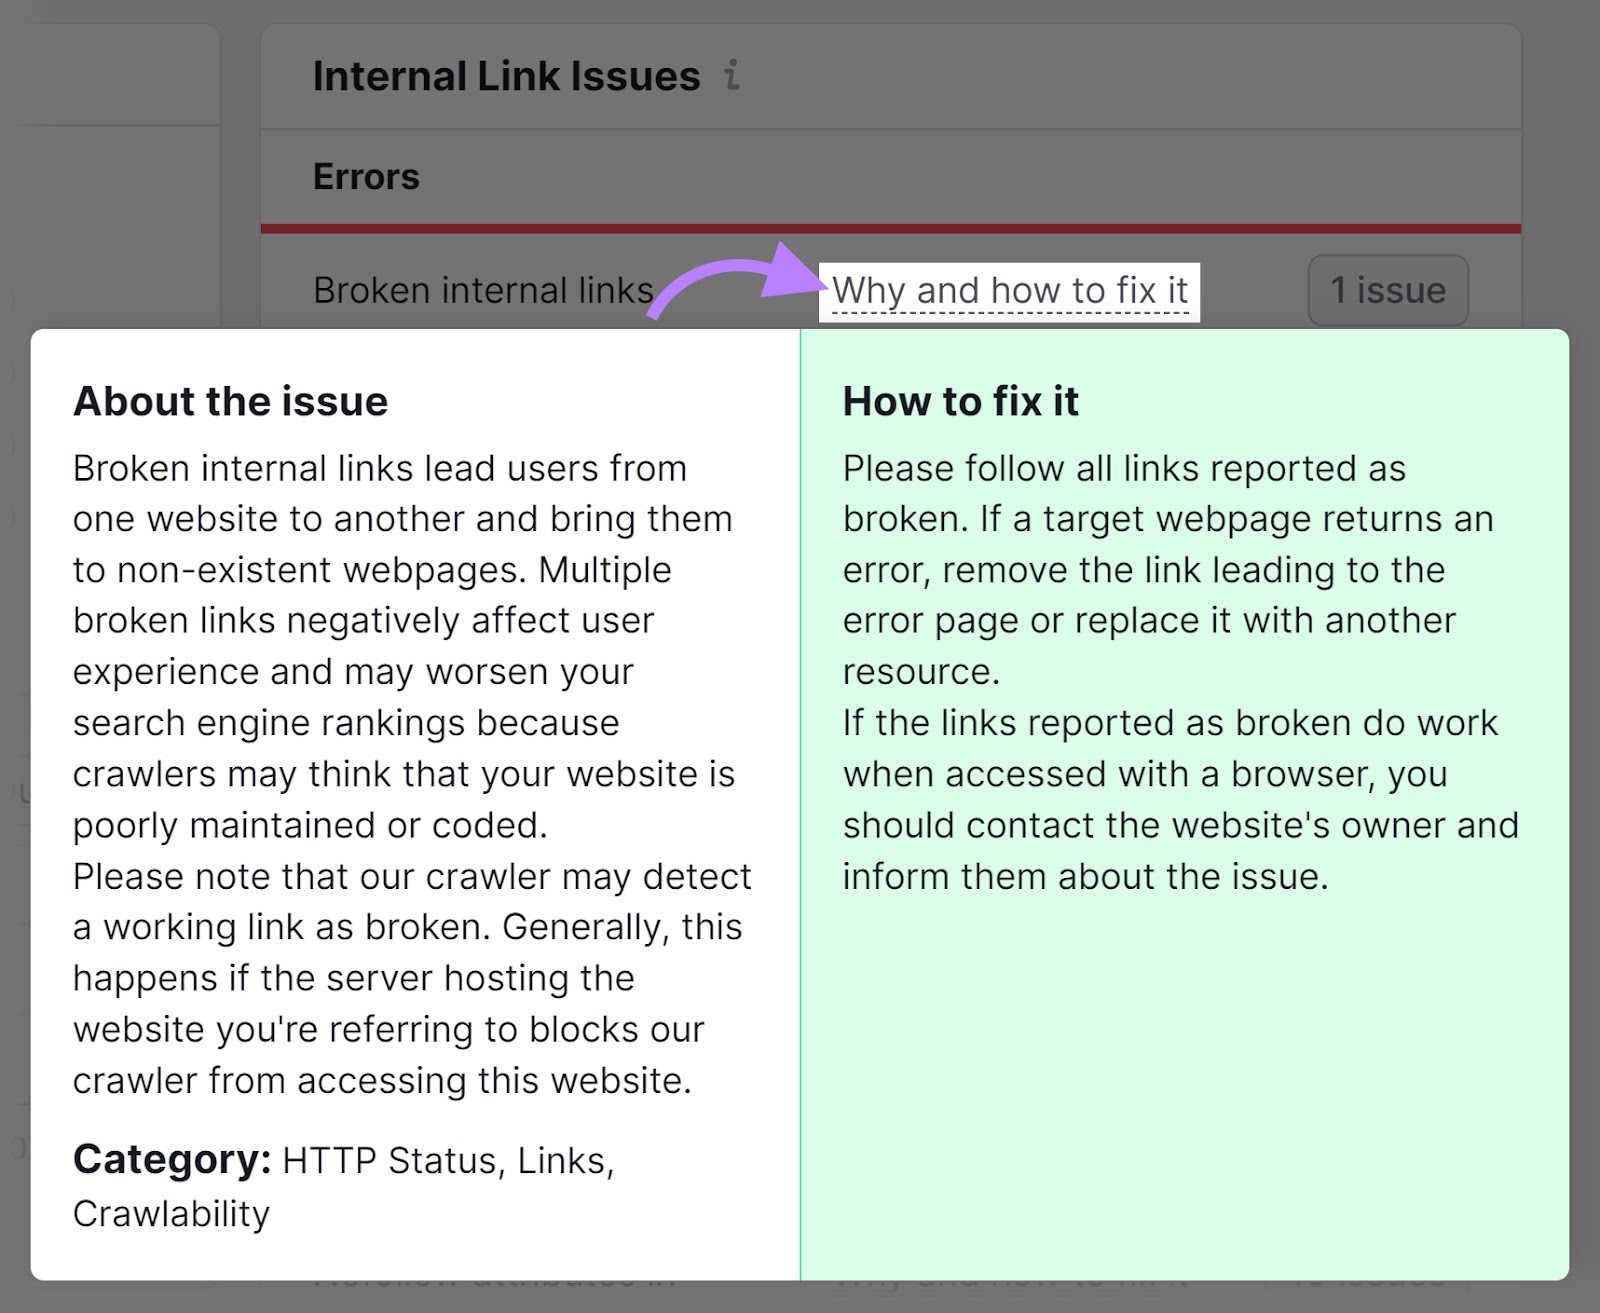 "Internal Link Issues" section of the Site Audit tool showing the "Why and how to fix it" window.